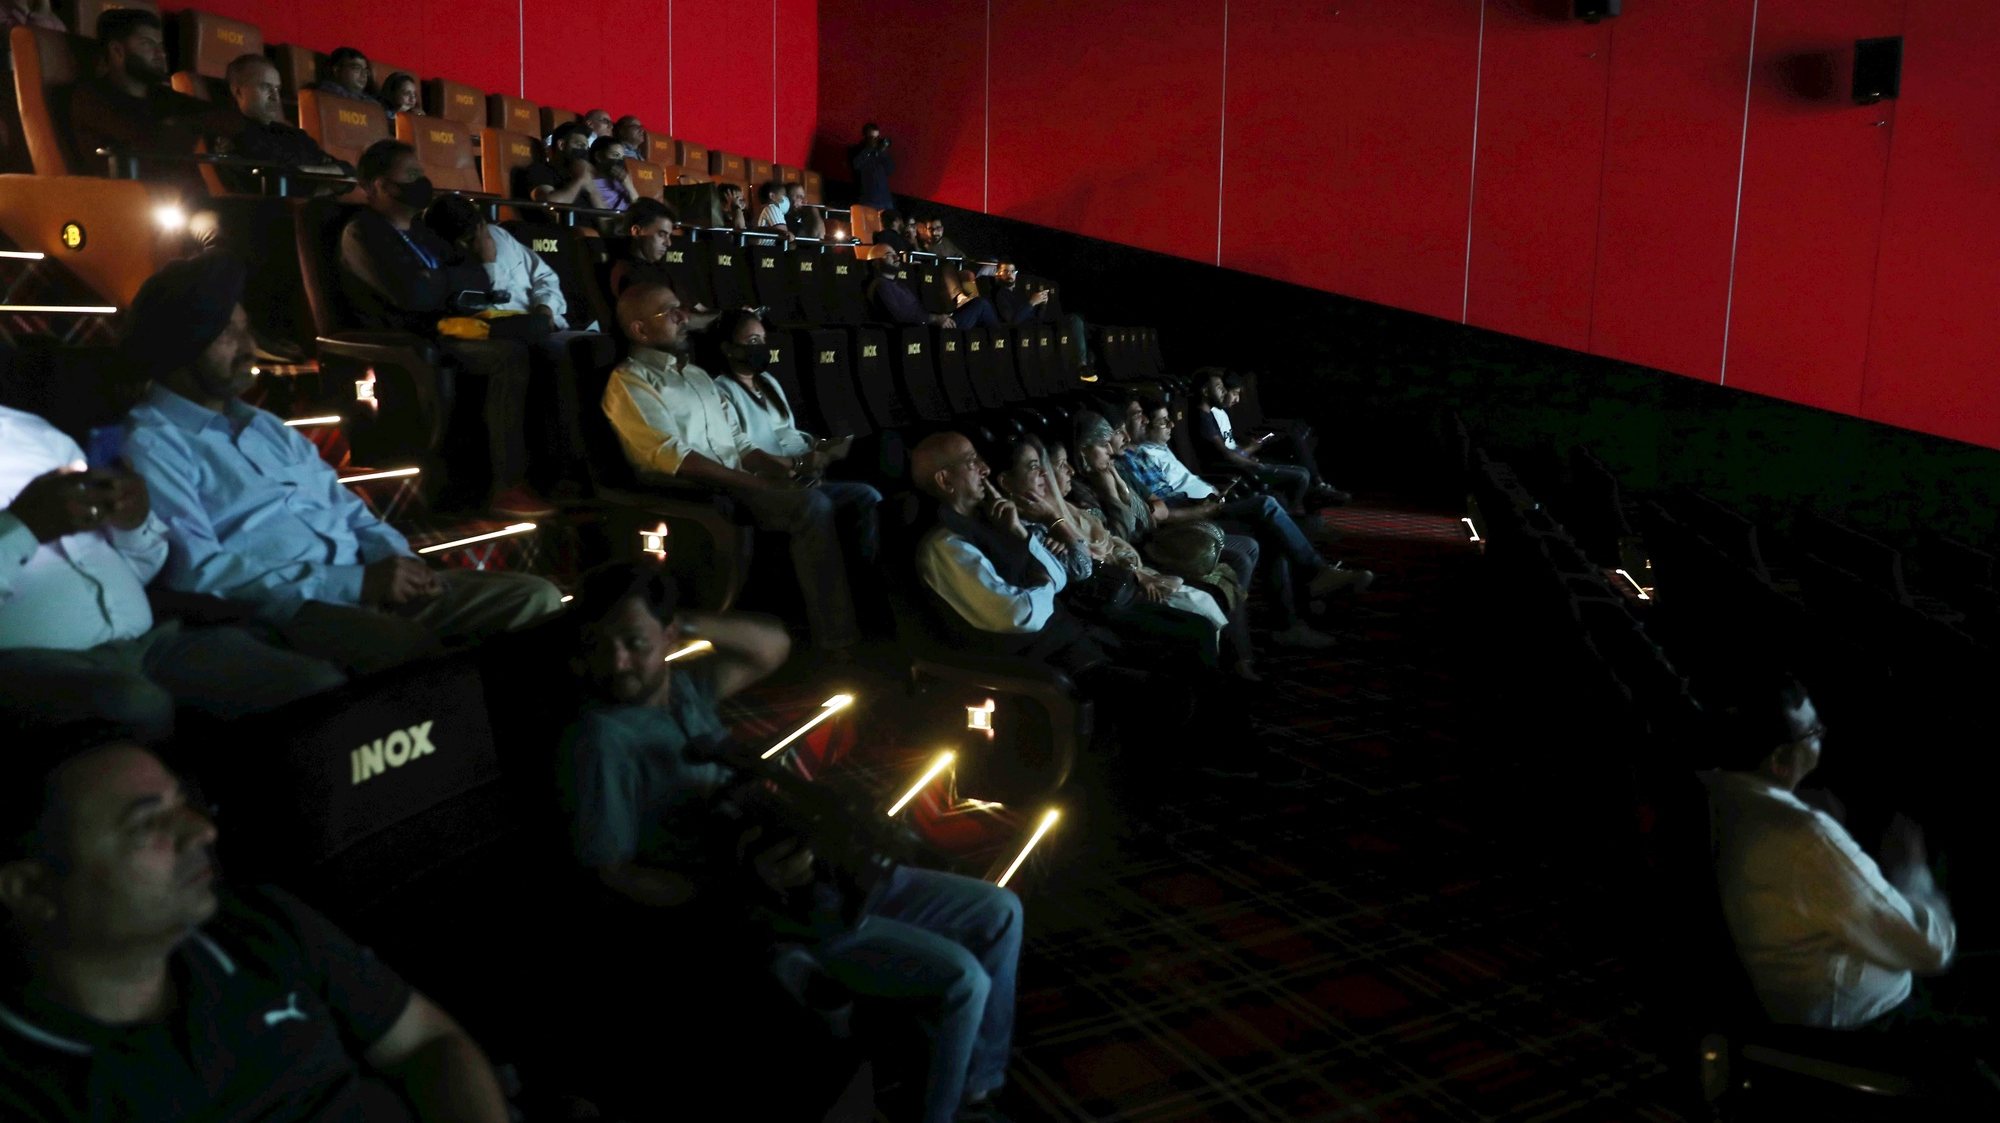 epa10215143 Media representatives and officials watch the screening of the Bollywood movie &#039;Vikram Vedha&#039; at the &#039;INOX&#039; multiplex cinema in Srinagar, the summer capital of Indian Kashmir, 30 September 2022. &#039;INOX&#039; is the first multiplex movie theater in Kashmir that will be thrown open for the public from 01 October 2022 on. The country&#039;s governor on 20 September inaugurated the cinema, marking the formal reopening of cinemas in Kashmir after a 33 years closure that was ordered in 1989 by the militant organization &#039;Allah Tigers&#039;. Although the situation improved drastically since the deadly period of militancy in the 1990s, most cinemas remained closed apart from some unsuccessful attempts to reopen some cinema houses.  EPA/FAROOQ KHAN